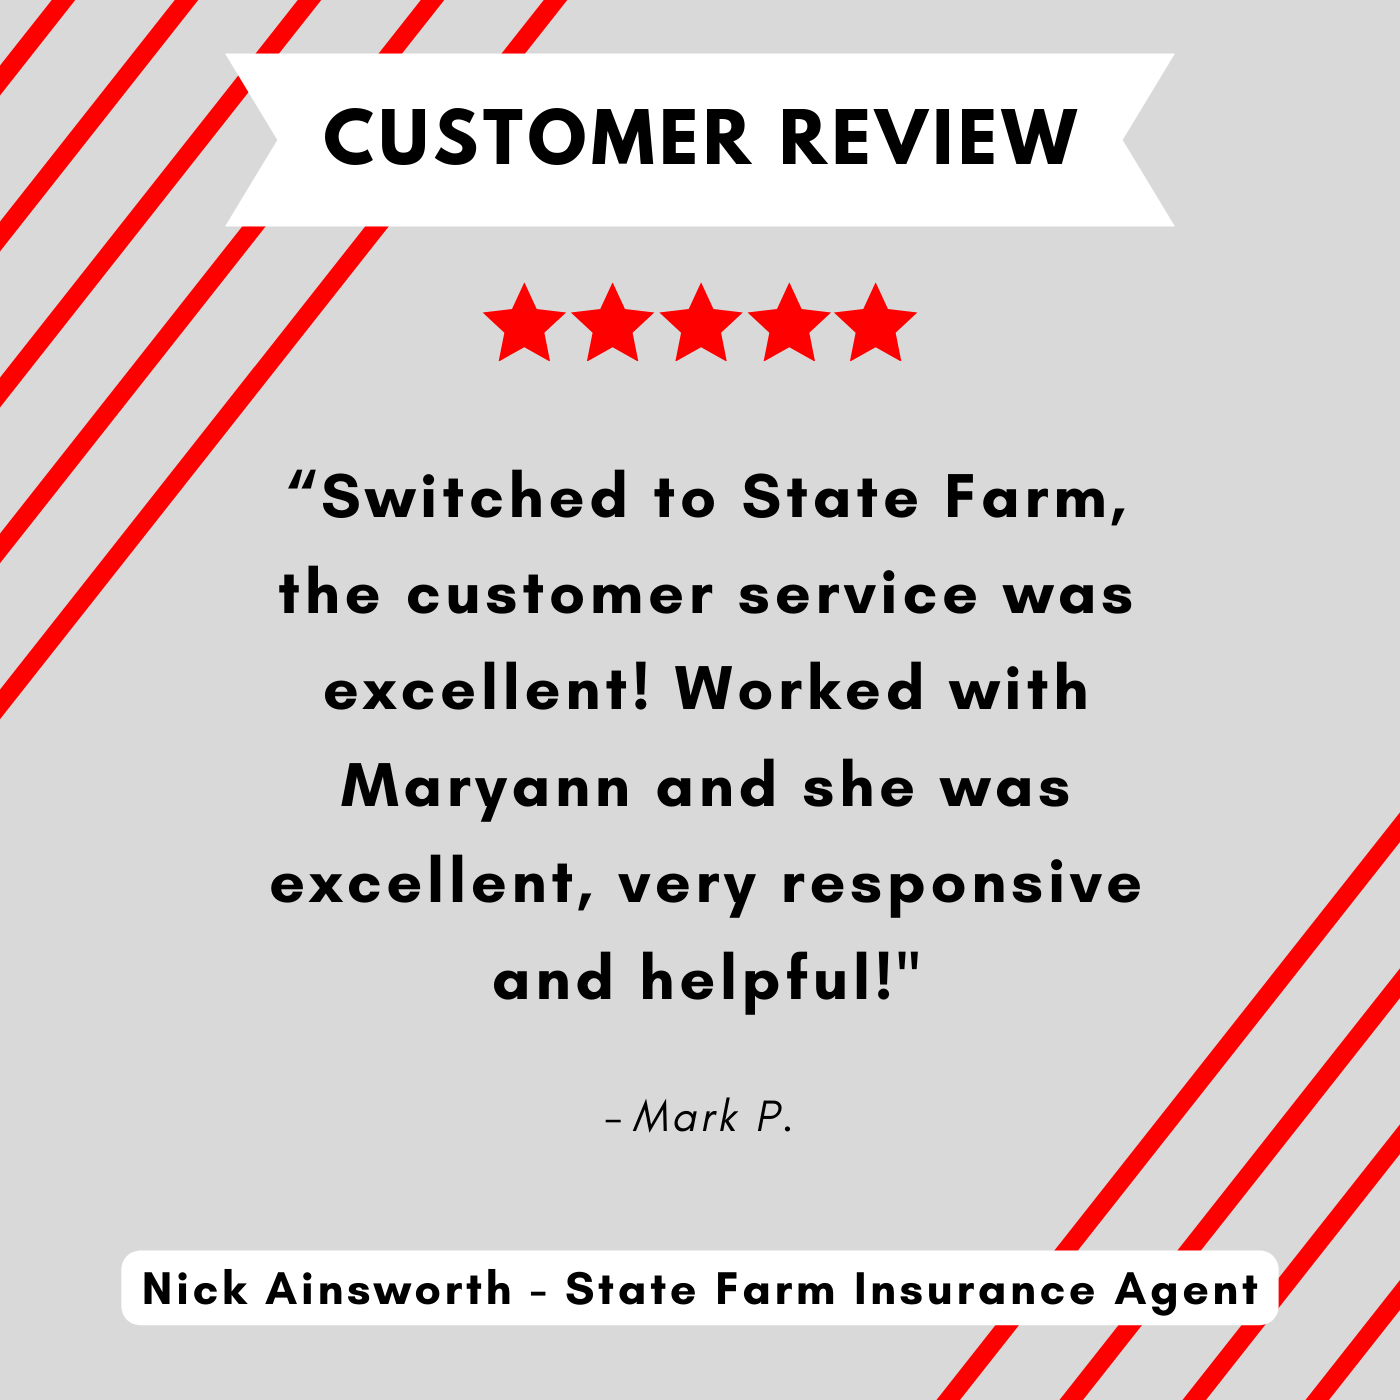 Nick Ainsworth - State Farm Insurance Agent
Review highlight